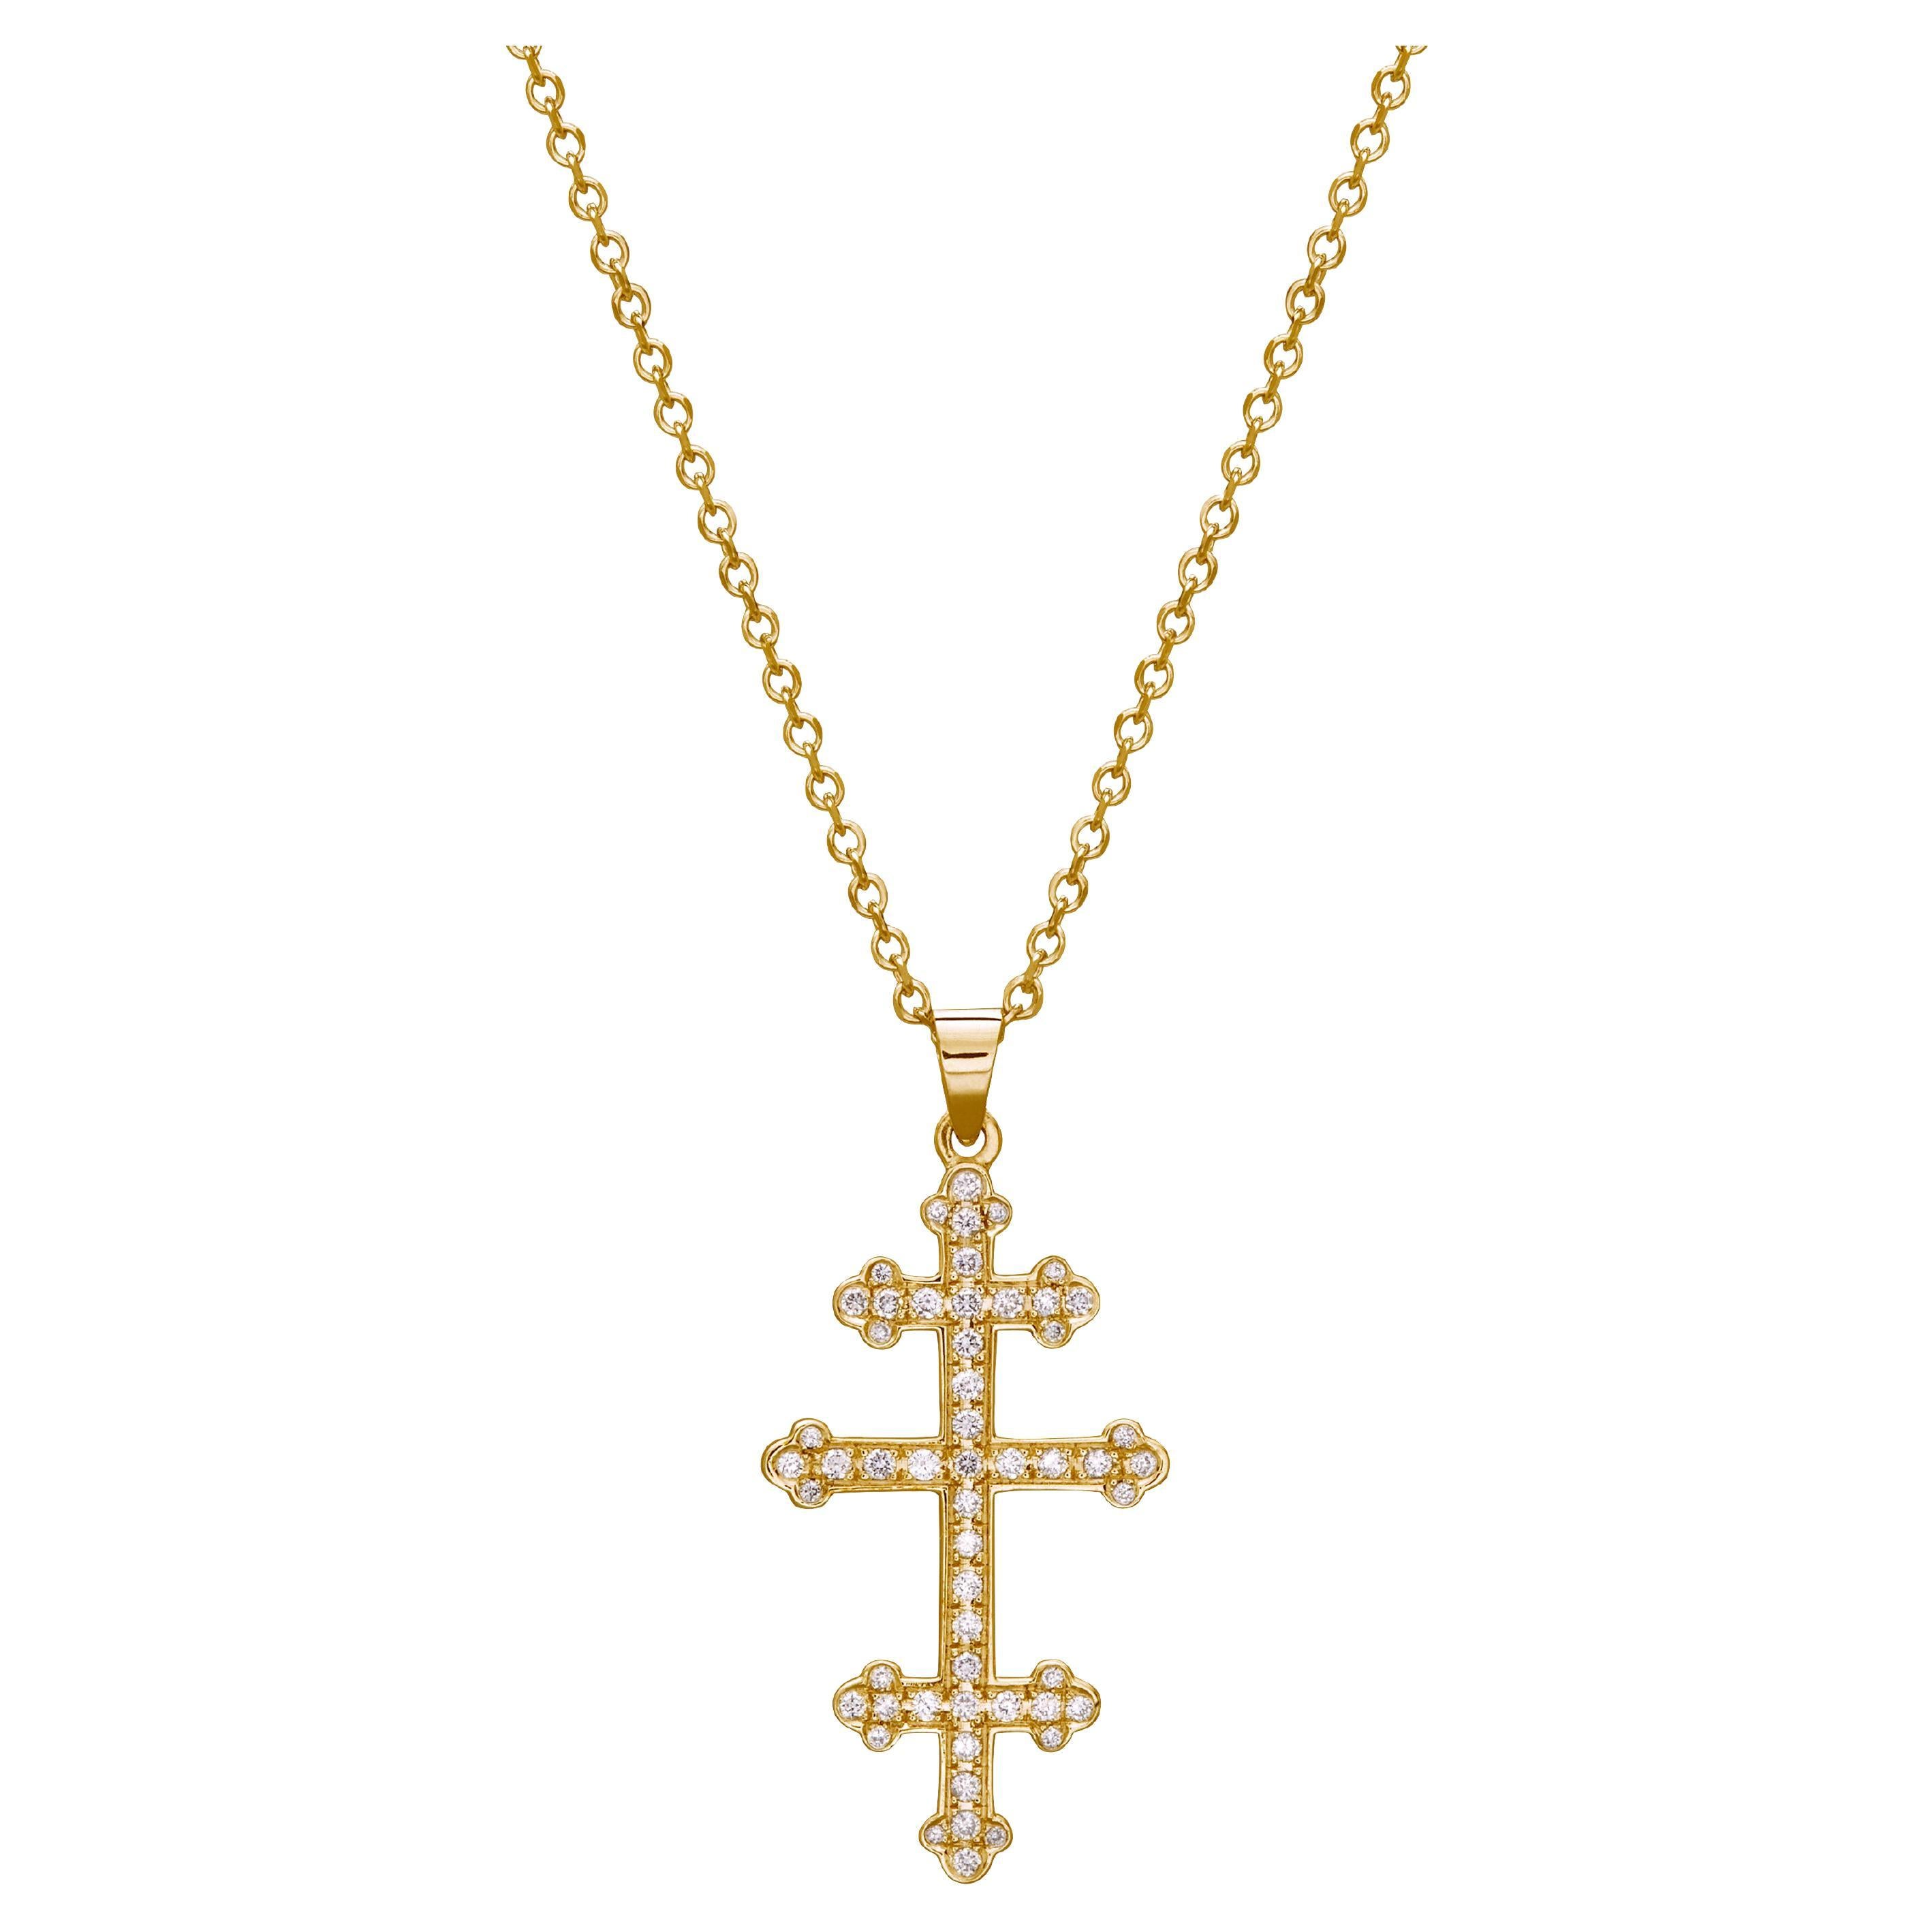 Pope's Cross Pendant Necklace in 18Kt Yellow Gold with Pave Diamonds GMCKS For Sale